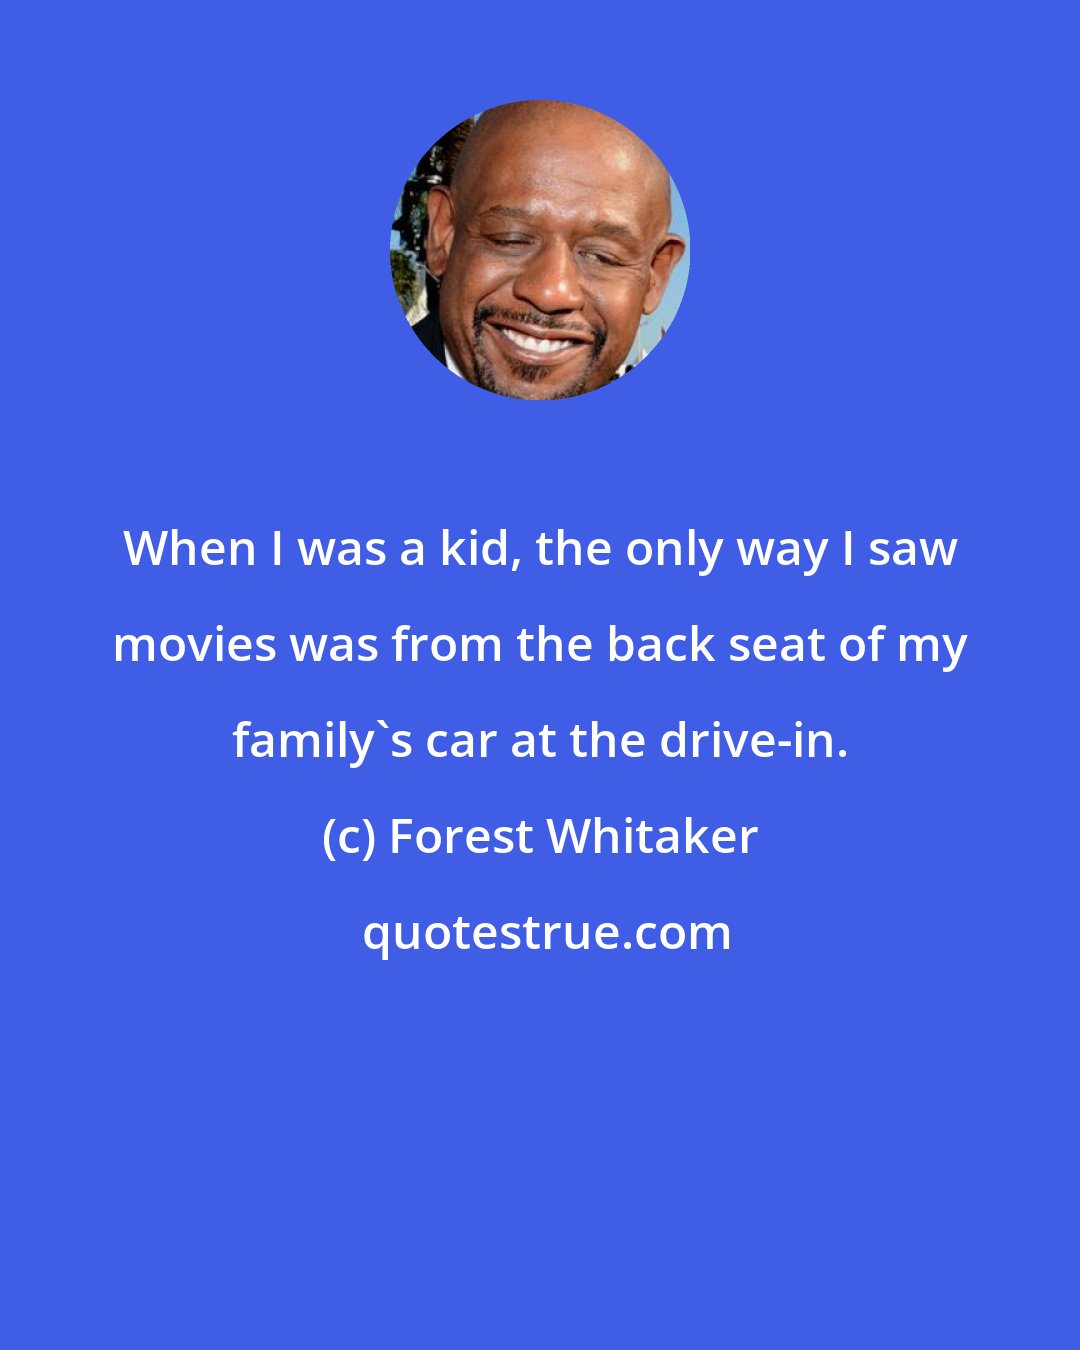 Forest Whitaker: When I was a kid, the only way I saw movies was from the back seat of my family's car at the drive-in.